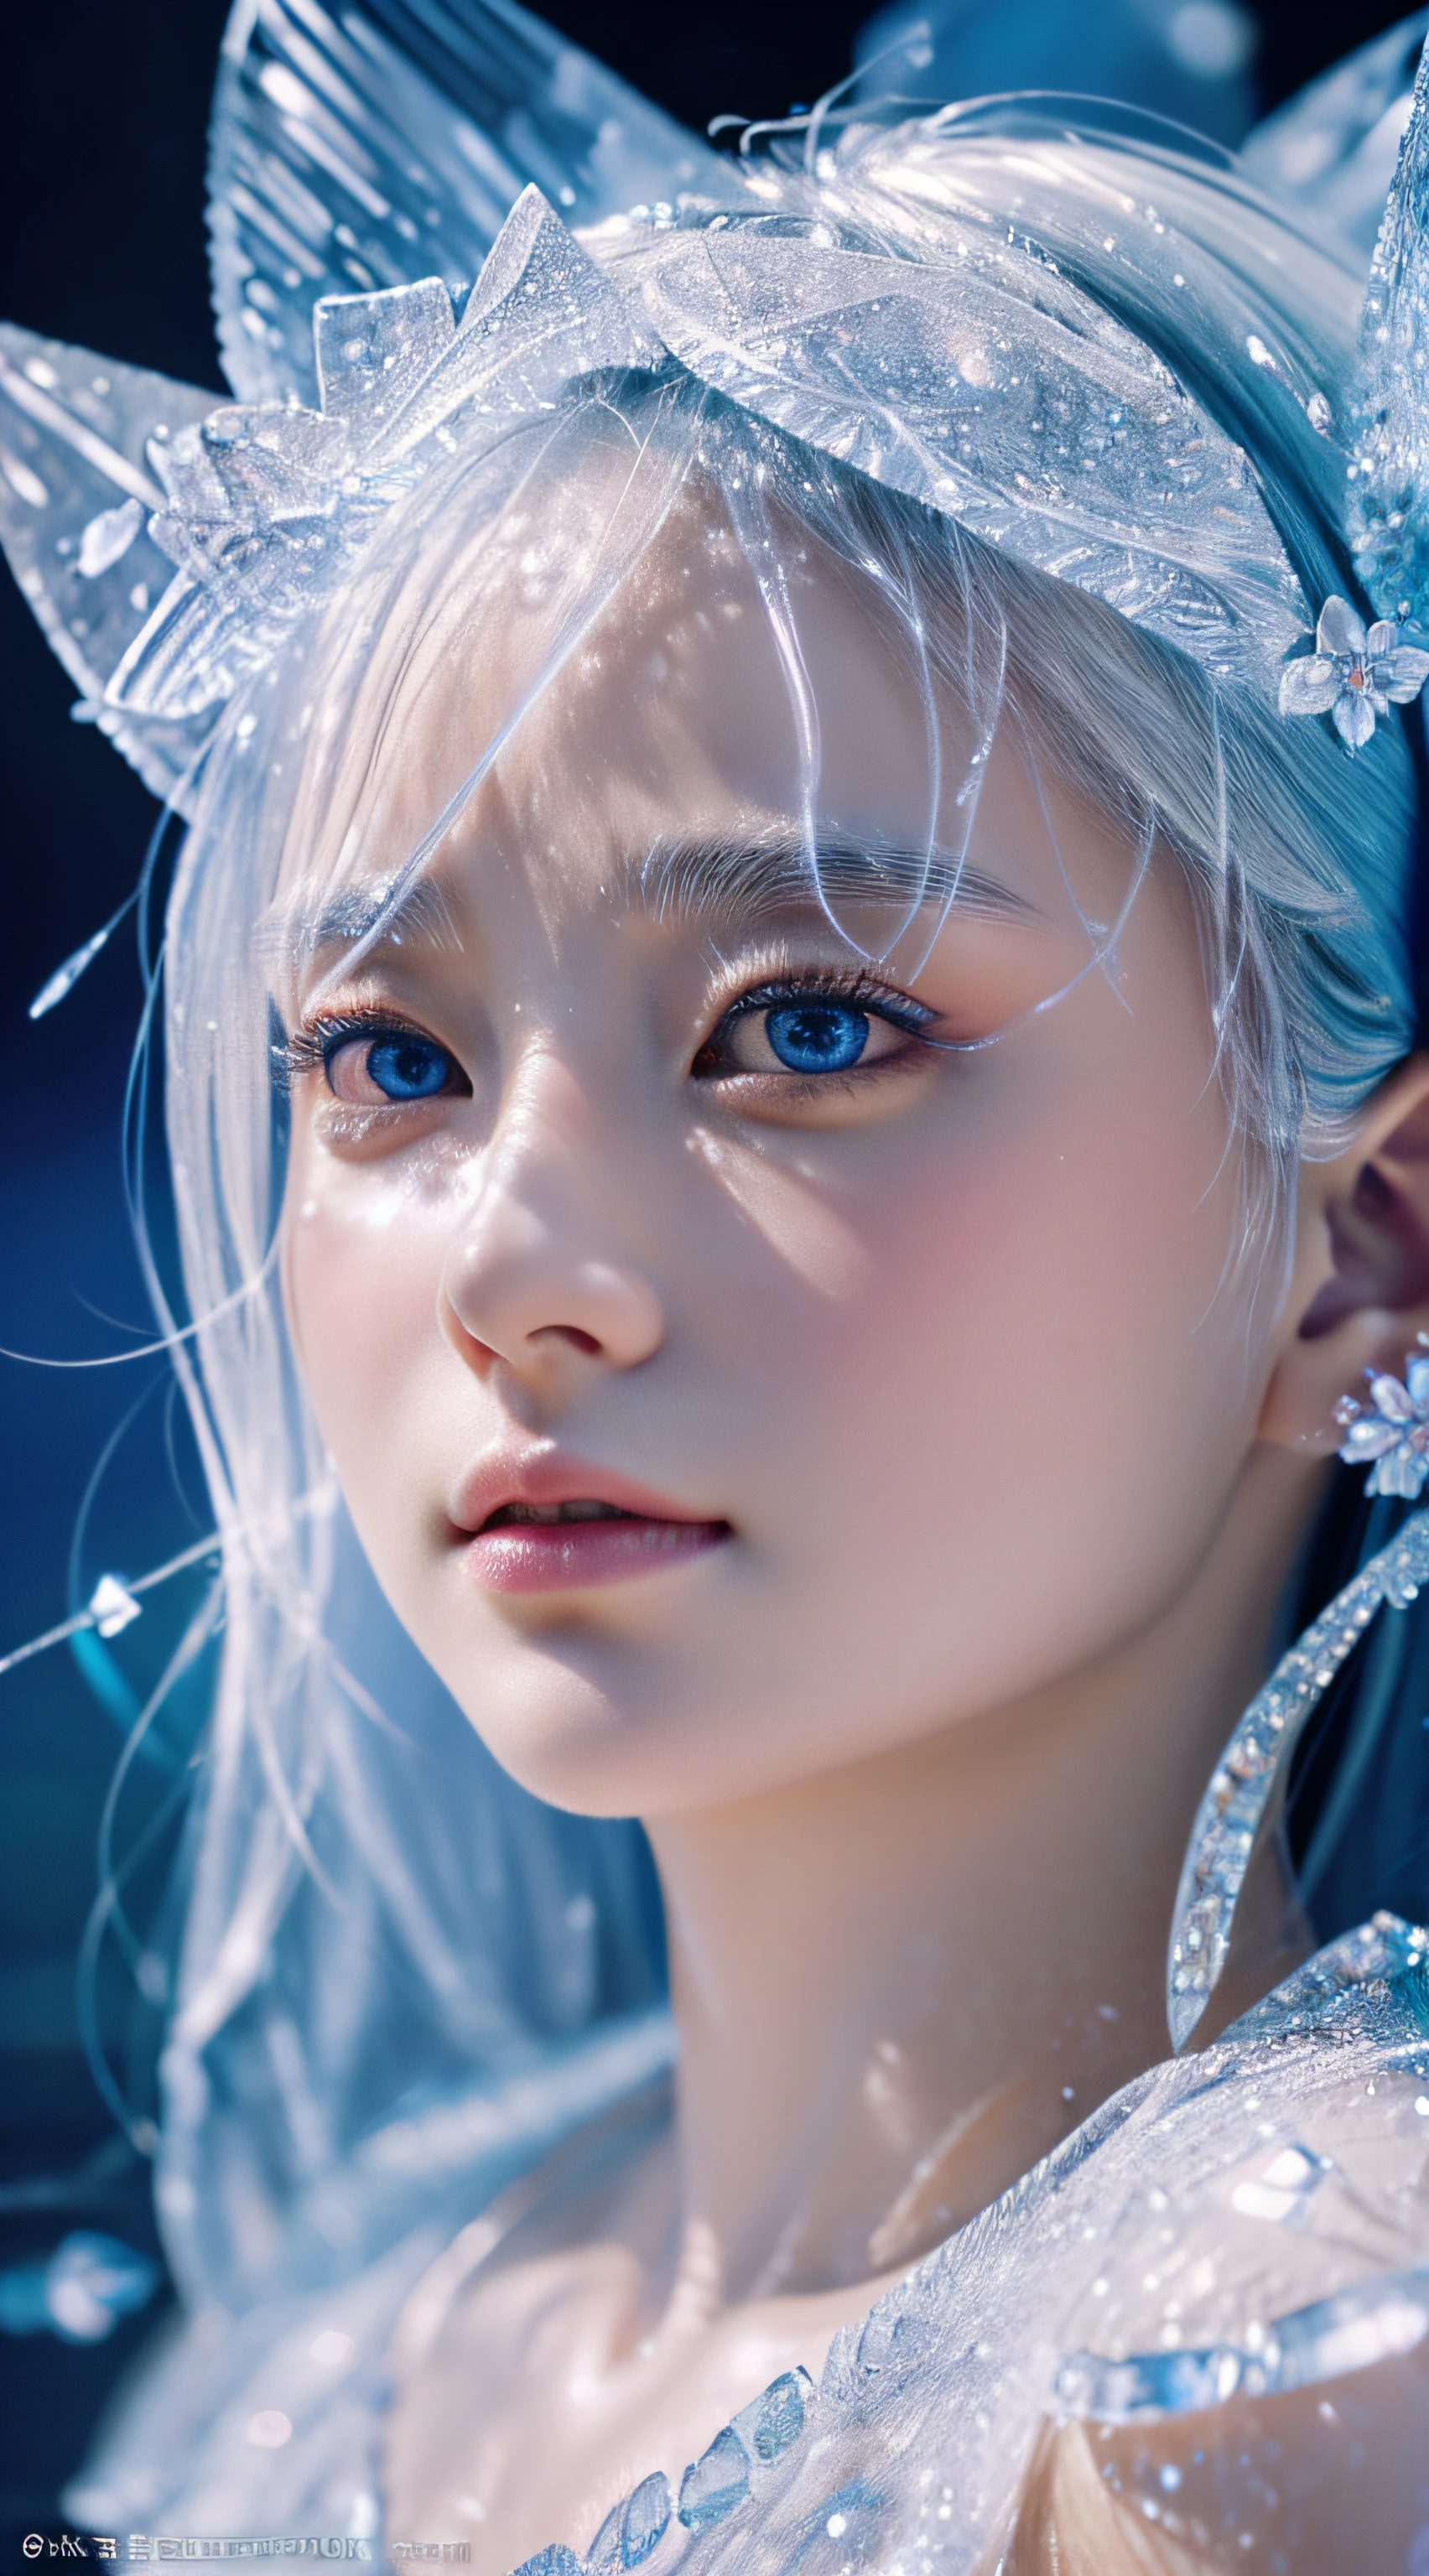 masterpiece, best quality,
official art, extremely
detailed cg 8k wallpaper,
(flying petals)
(detailed ice) , crystals
texture skin, cold
expression, ((fox ears)),
white hair, long
hair, messy hair, blue eye,
looking at viewer,
extremely delicate and
beautiful, water, ((beauty
detailed eye)), highly
detailed, cinematic
lighting, ((beautiful face),
fine water surface, (original
figure painting), ultra-
detailed, incredibly
detailed, (an extremely
delicate and beautiful),
beautiful detailed eyes,
(best quality)